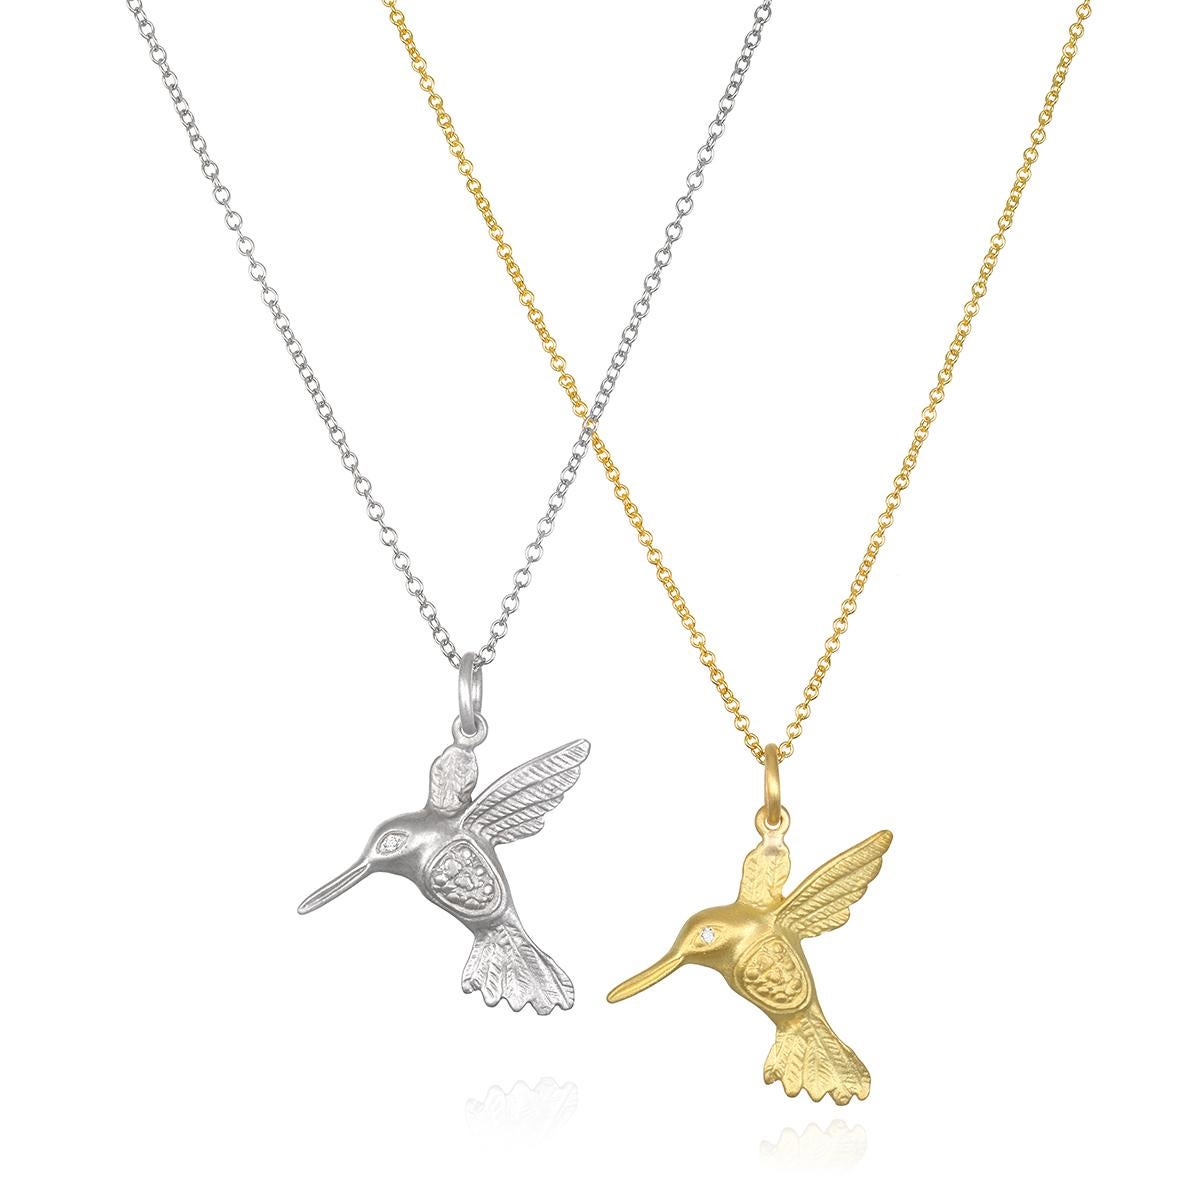 Faye Kim's 18K White Gold Hummingbird, part of the designer's Signature Charm Collection, features a sparkly diamond eye and can be sold separately from the chain or soldered onto one of our wire bangles. Each charm makes a design statement on its